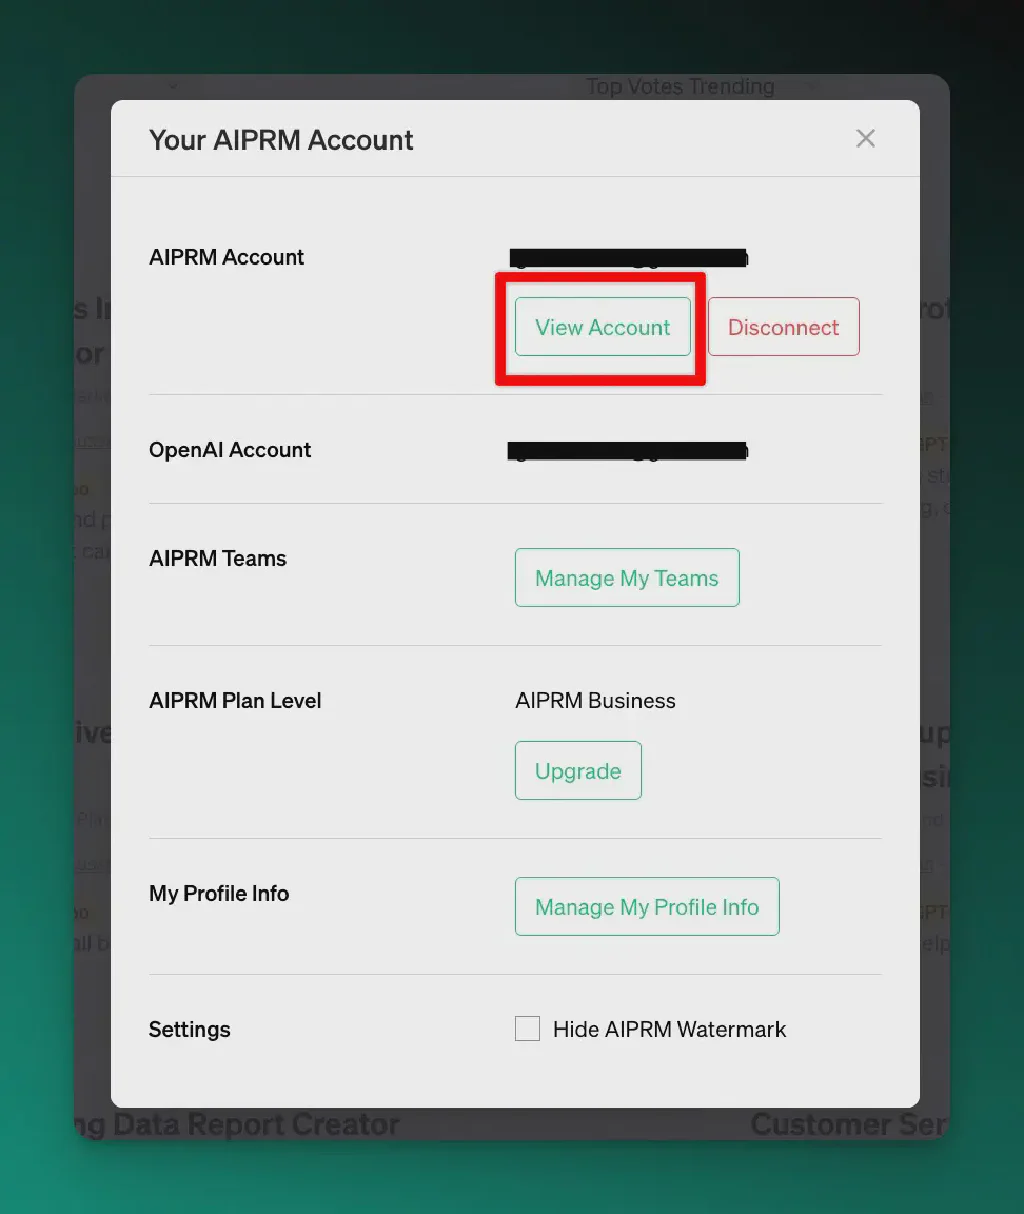 Screenshot of AIPRM management modal with View Account highlighted.